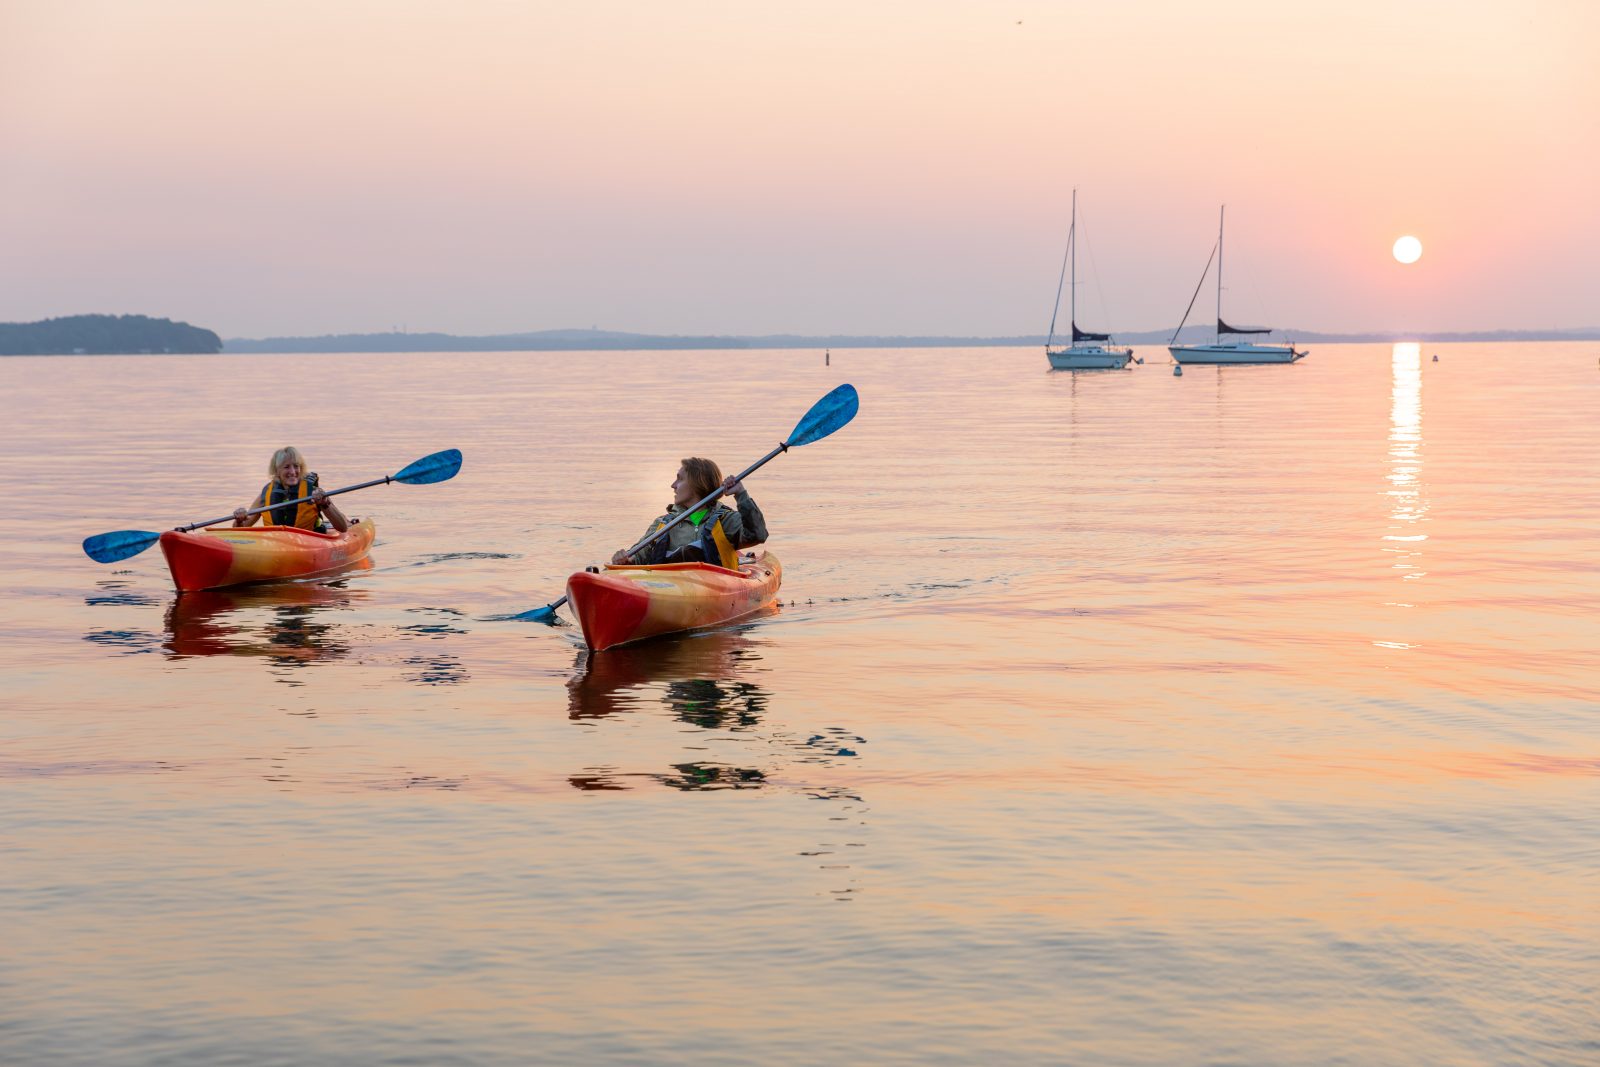 Two people paddling kayaks in the water at sunset.